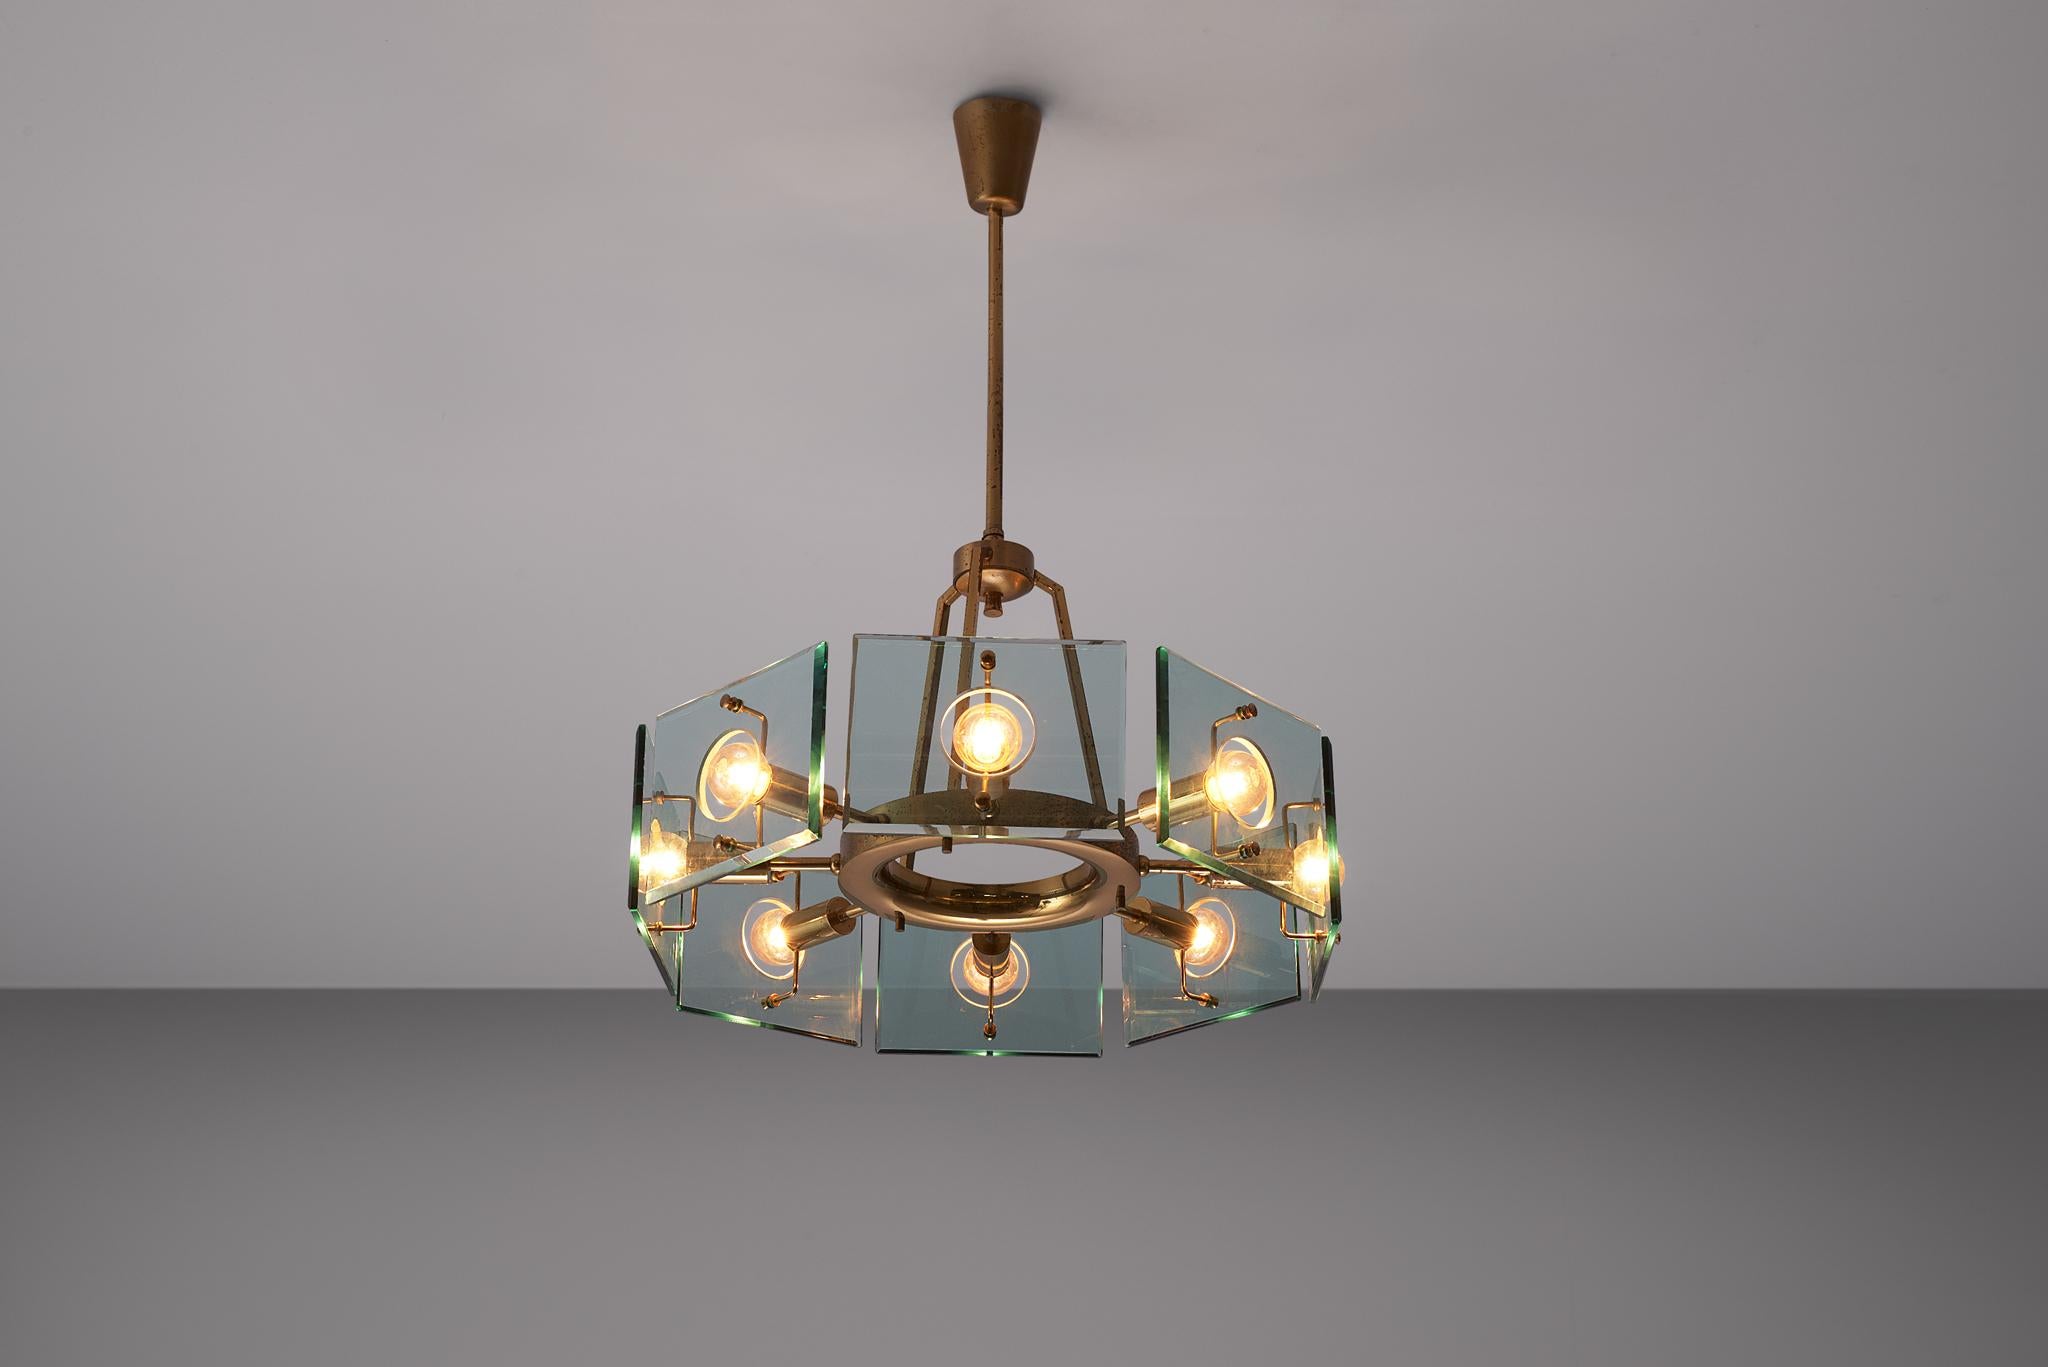 Gino Paroldo, chandelier, brass and glass, Italy, 1950s

Italian Postwar chandelier by the Italian designer Gino Paroldo. The fixture is made of one brass stem, which run into a round shaped shade with 8 light points that are covered with slightly